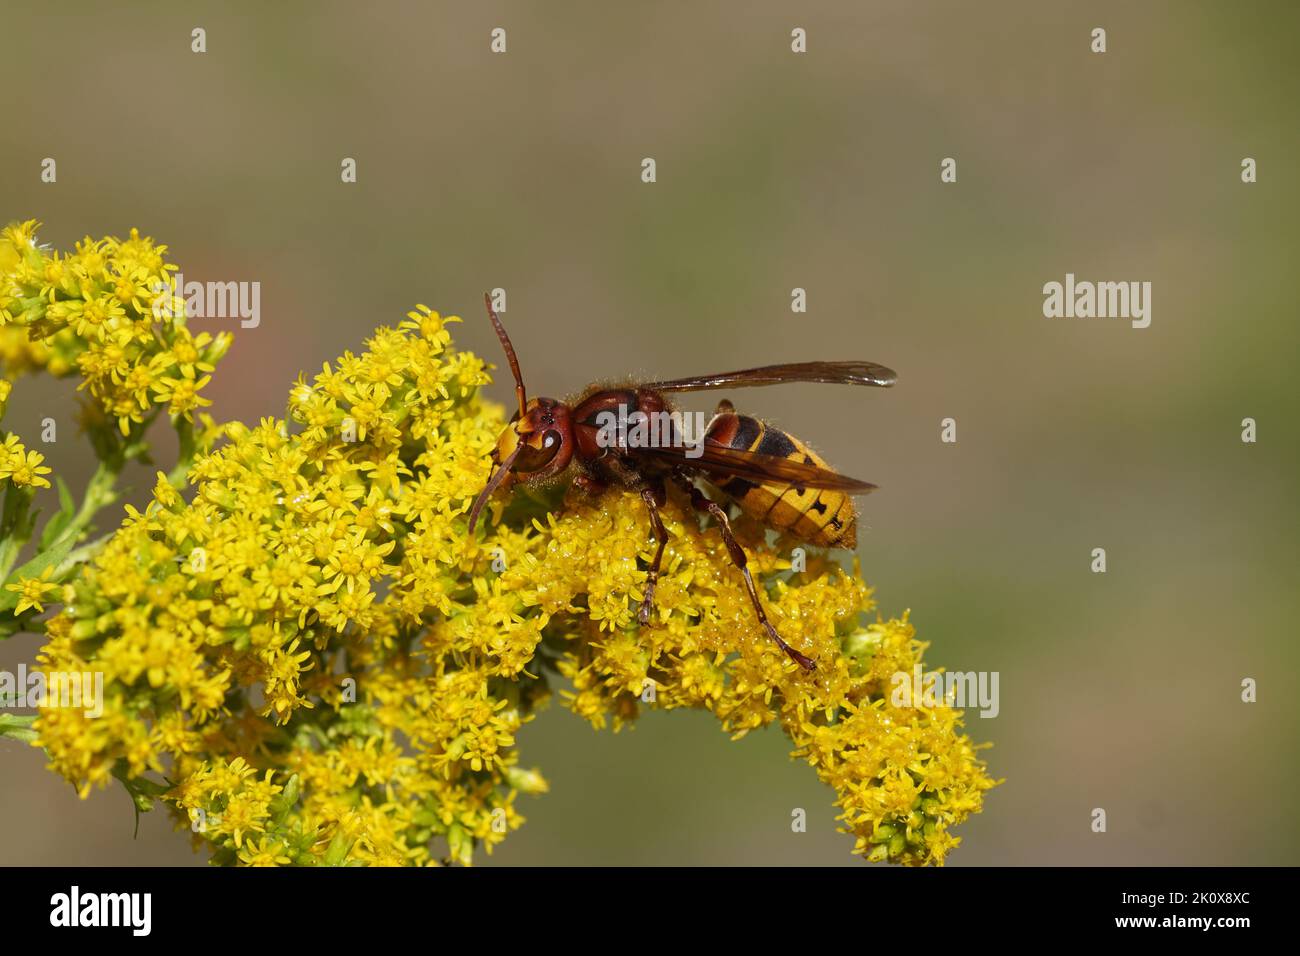 European hornet (Vespa crabro) of the family Vespidae). On flowers Canada goldenrod or Canadian goldenrod (Solidago Canadensis), family Asteraceae. Stock Photo